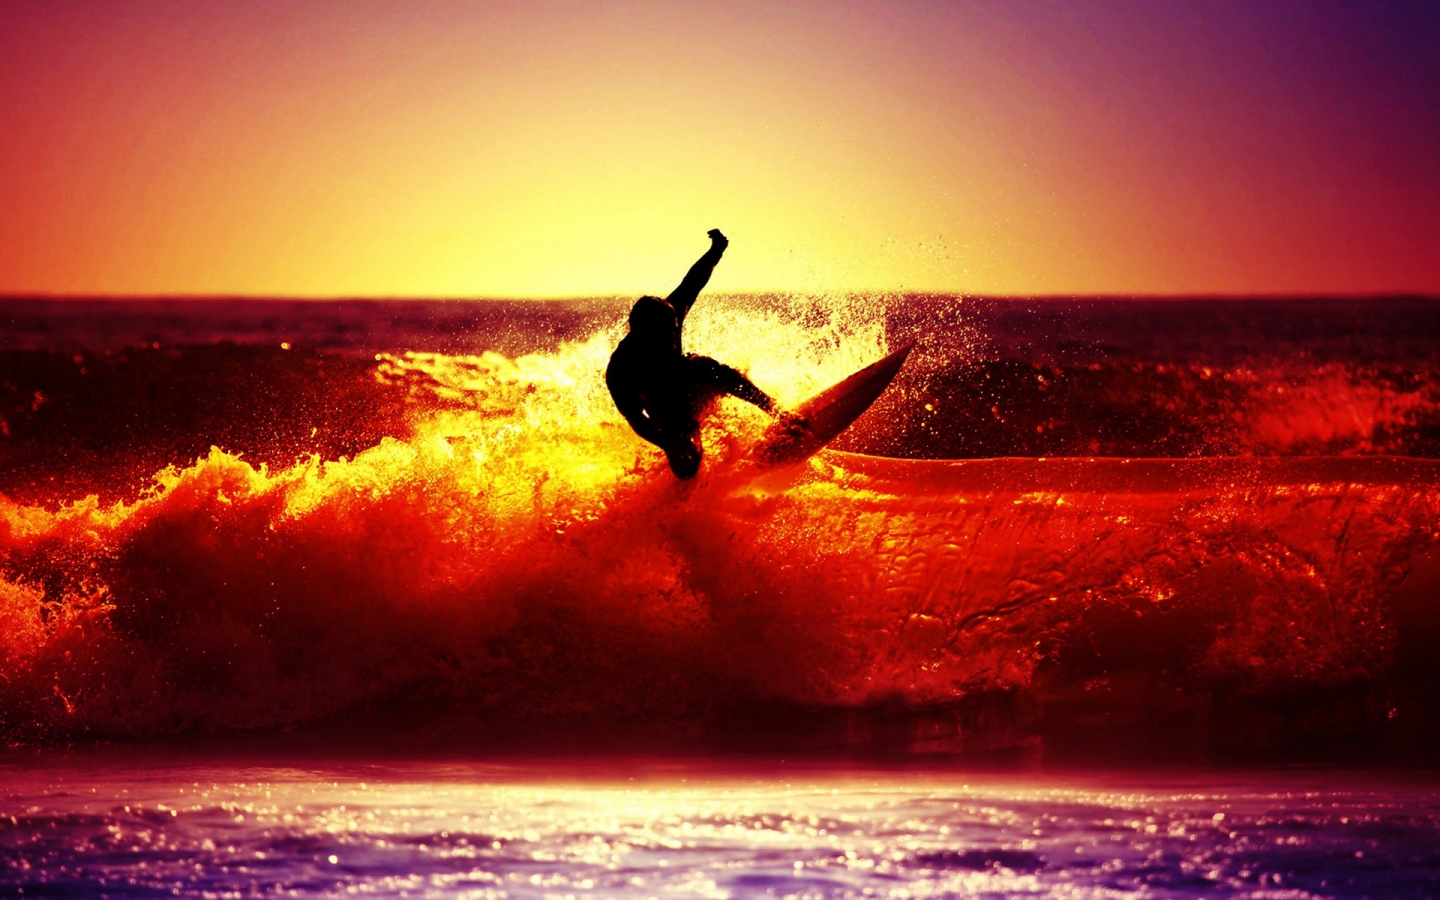 Sunset Surfing for 1440 x 900 widescreen resolution